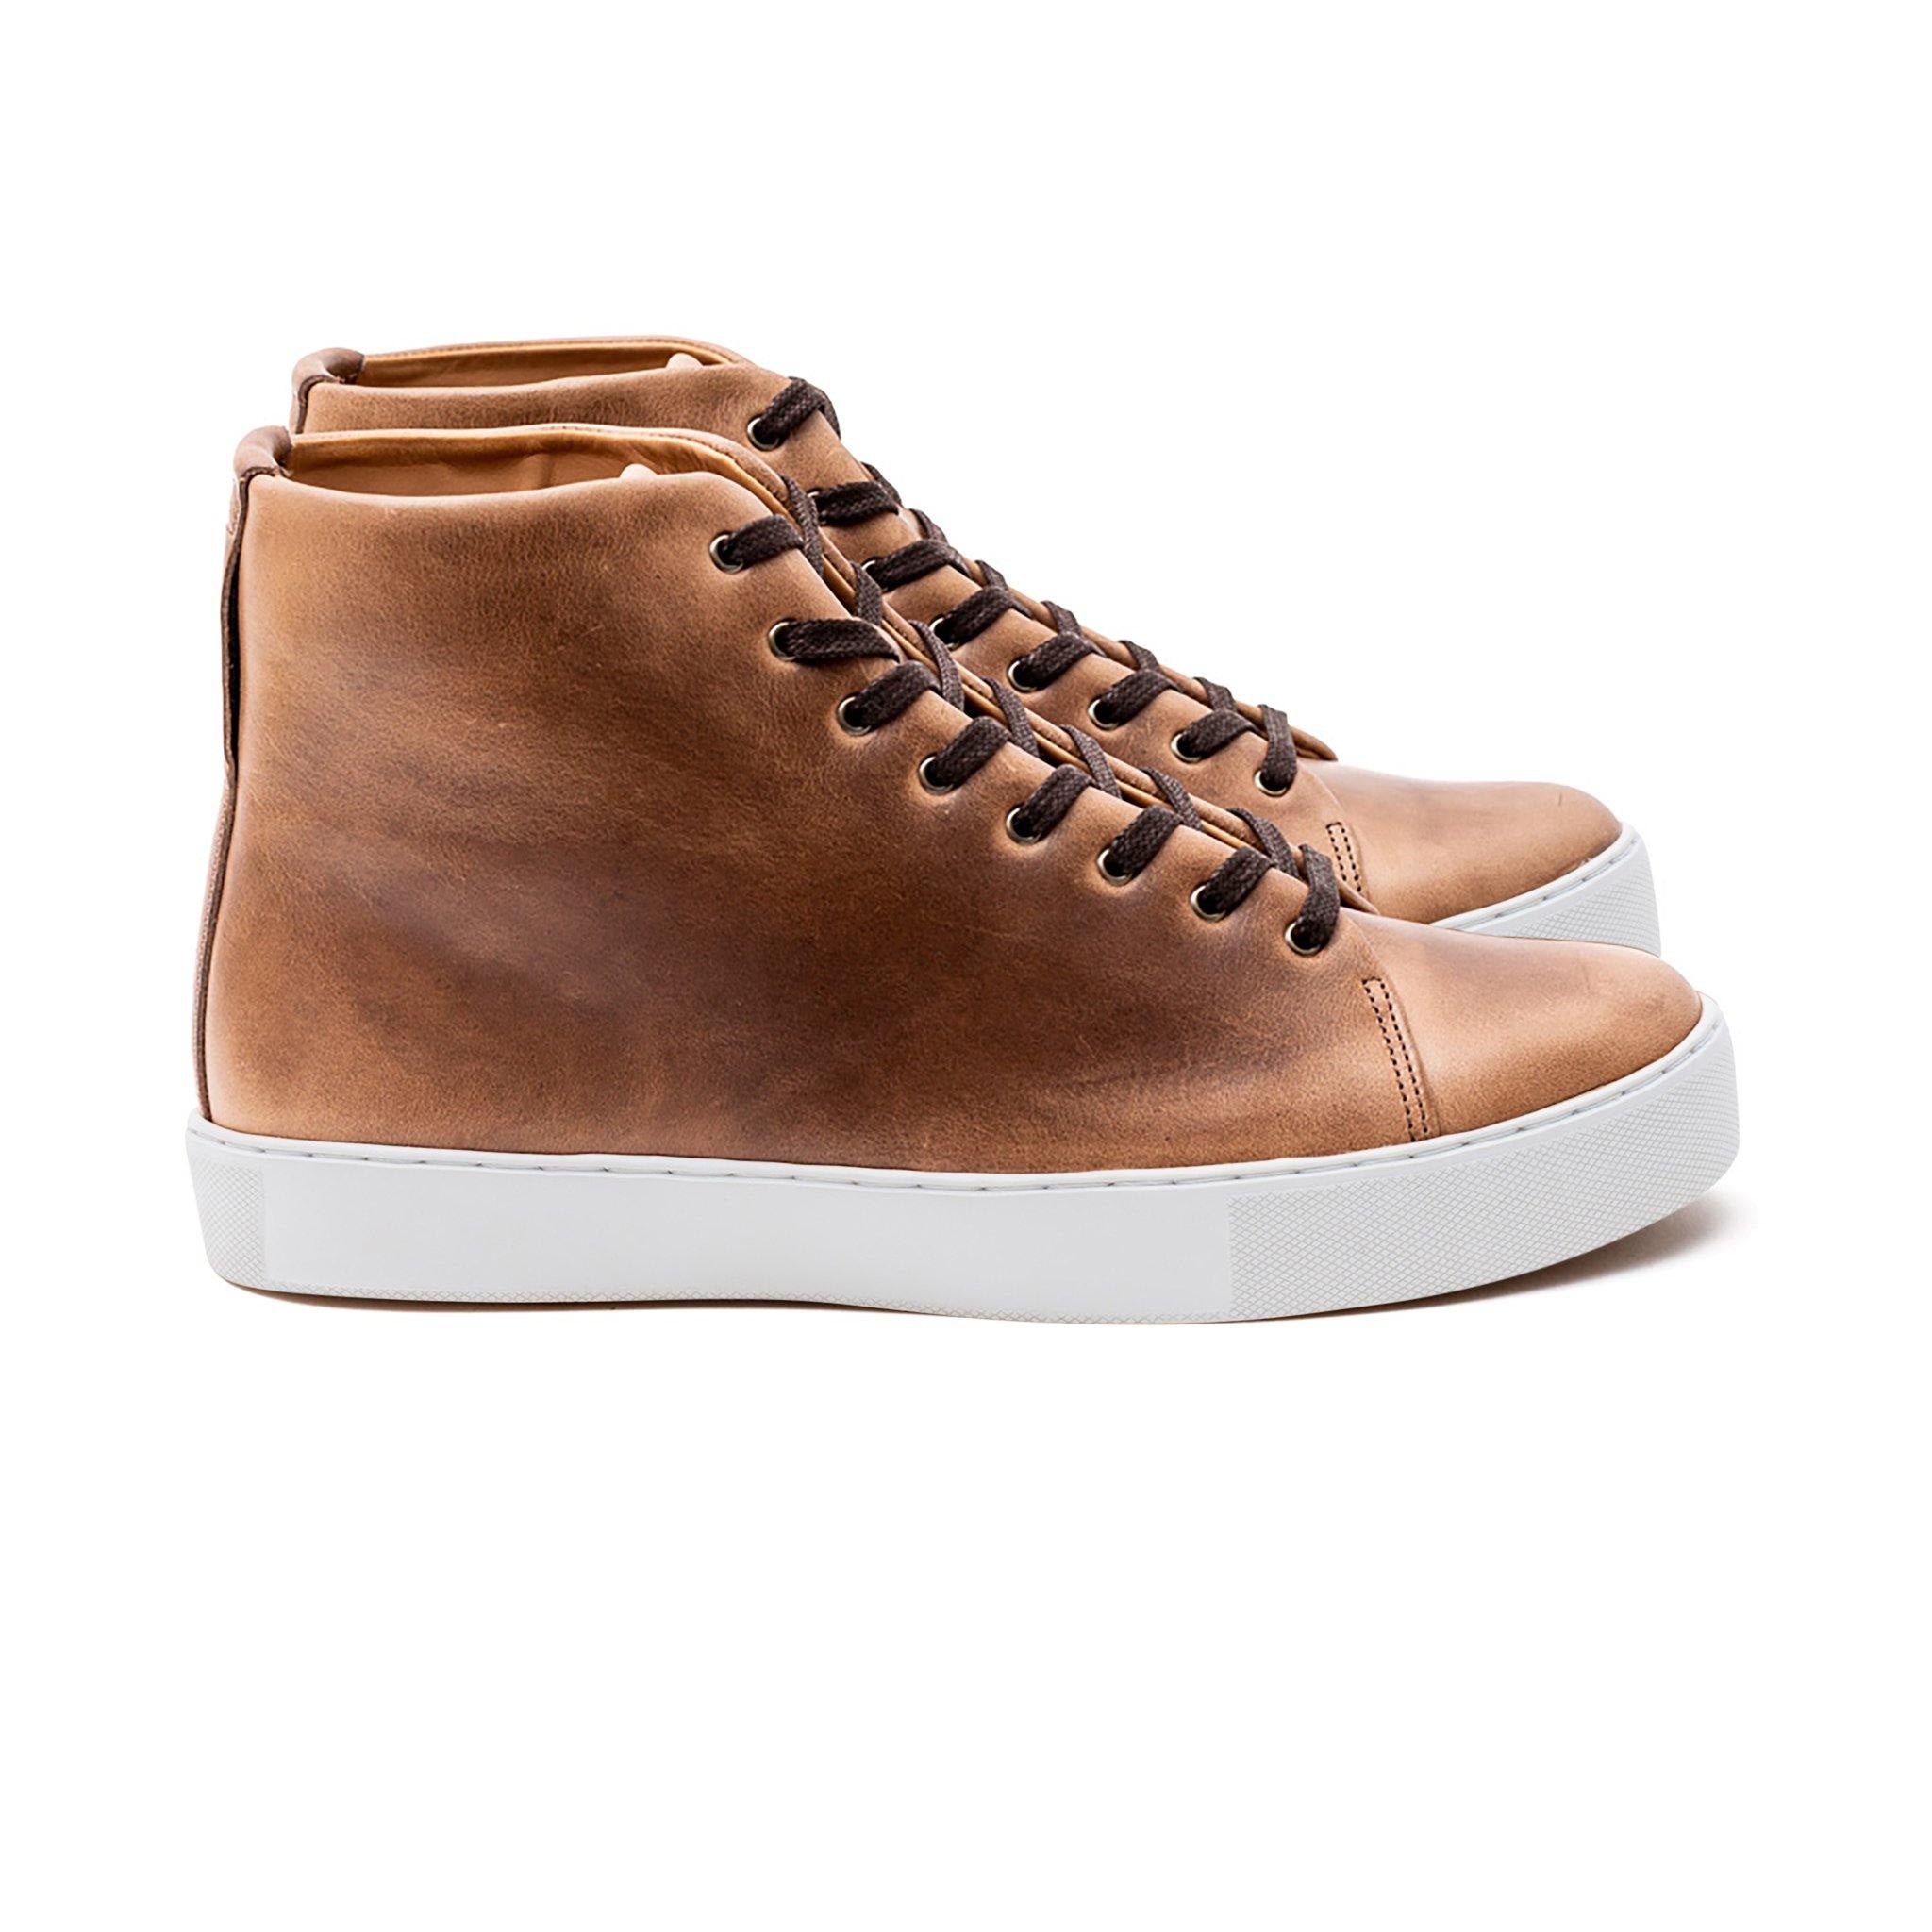 Overstone Hi Derby - Horween Natural Chromexcel Leather – Crown Northampton